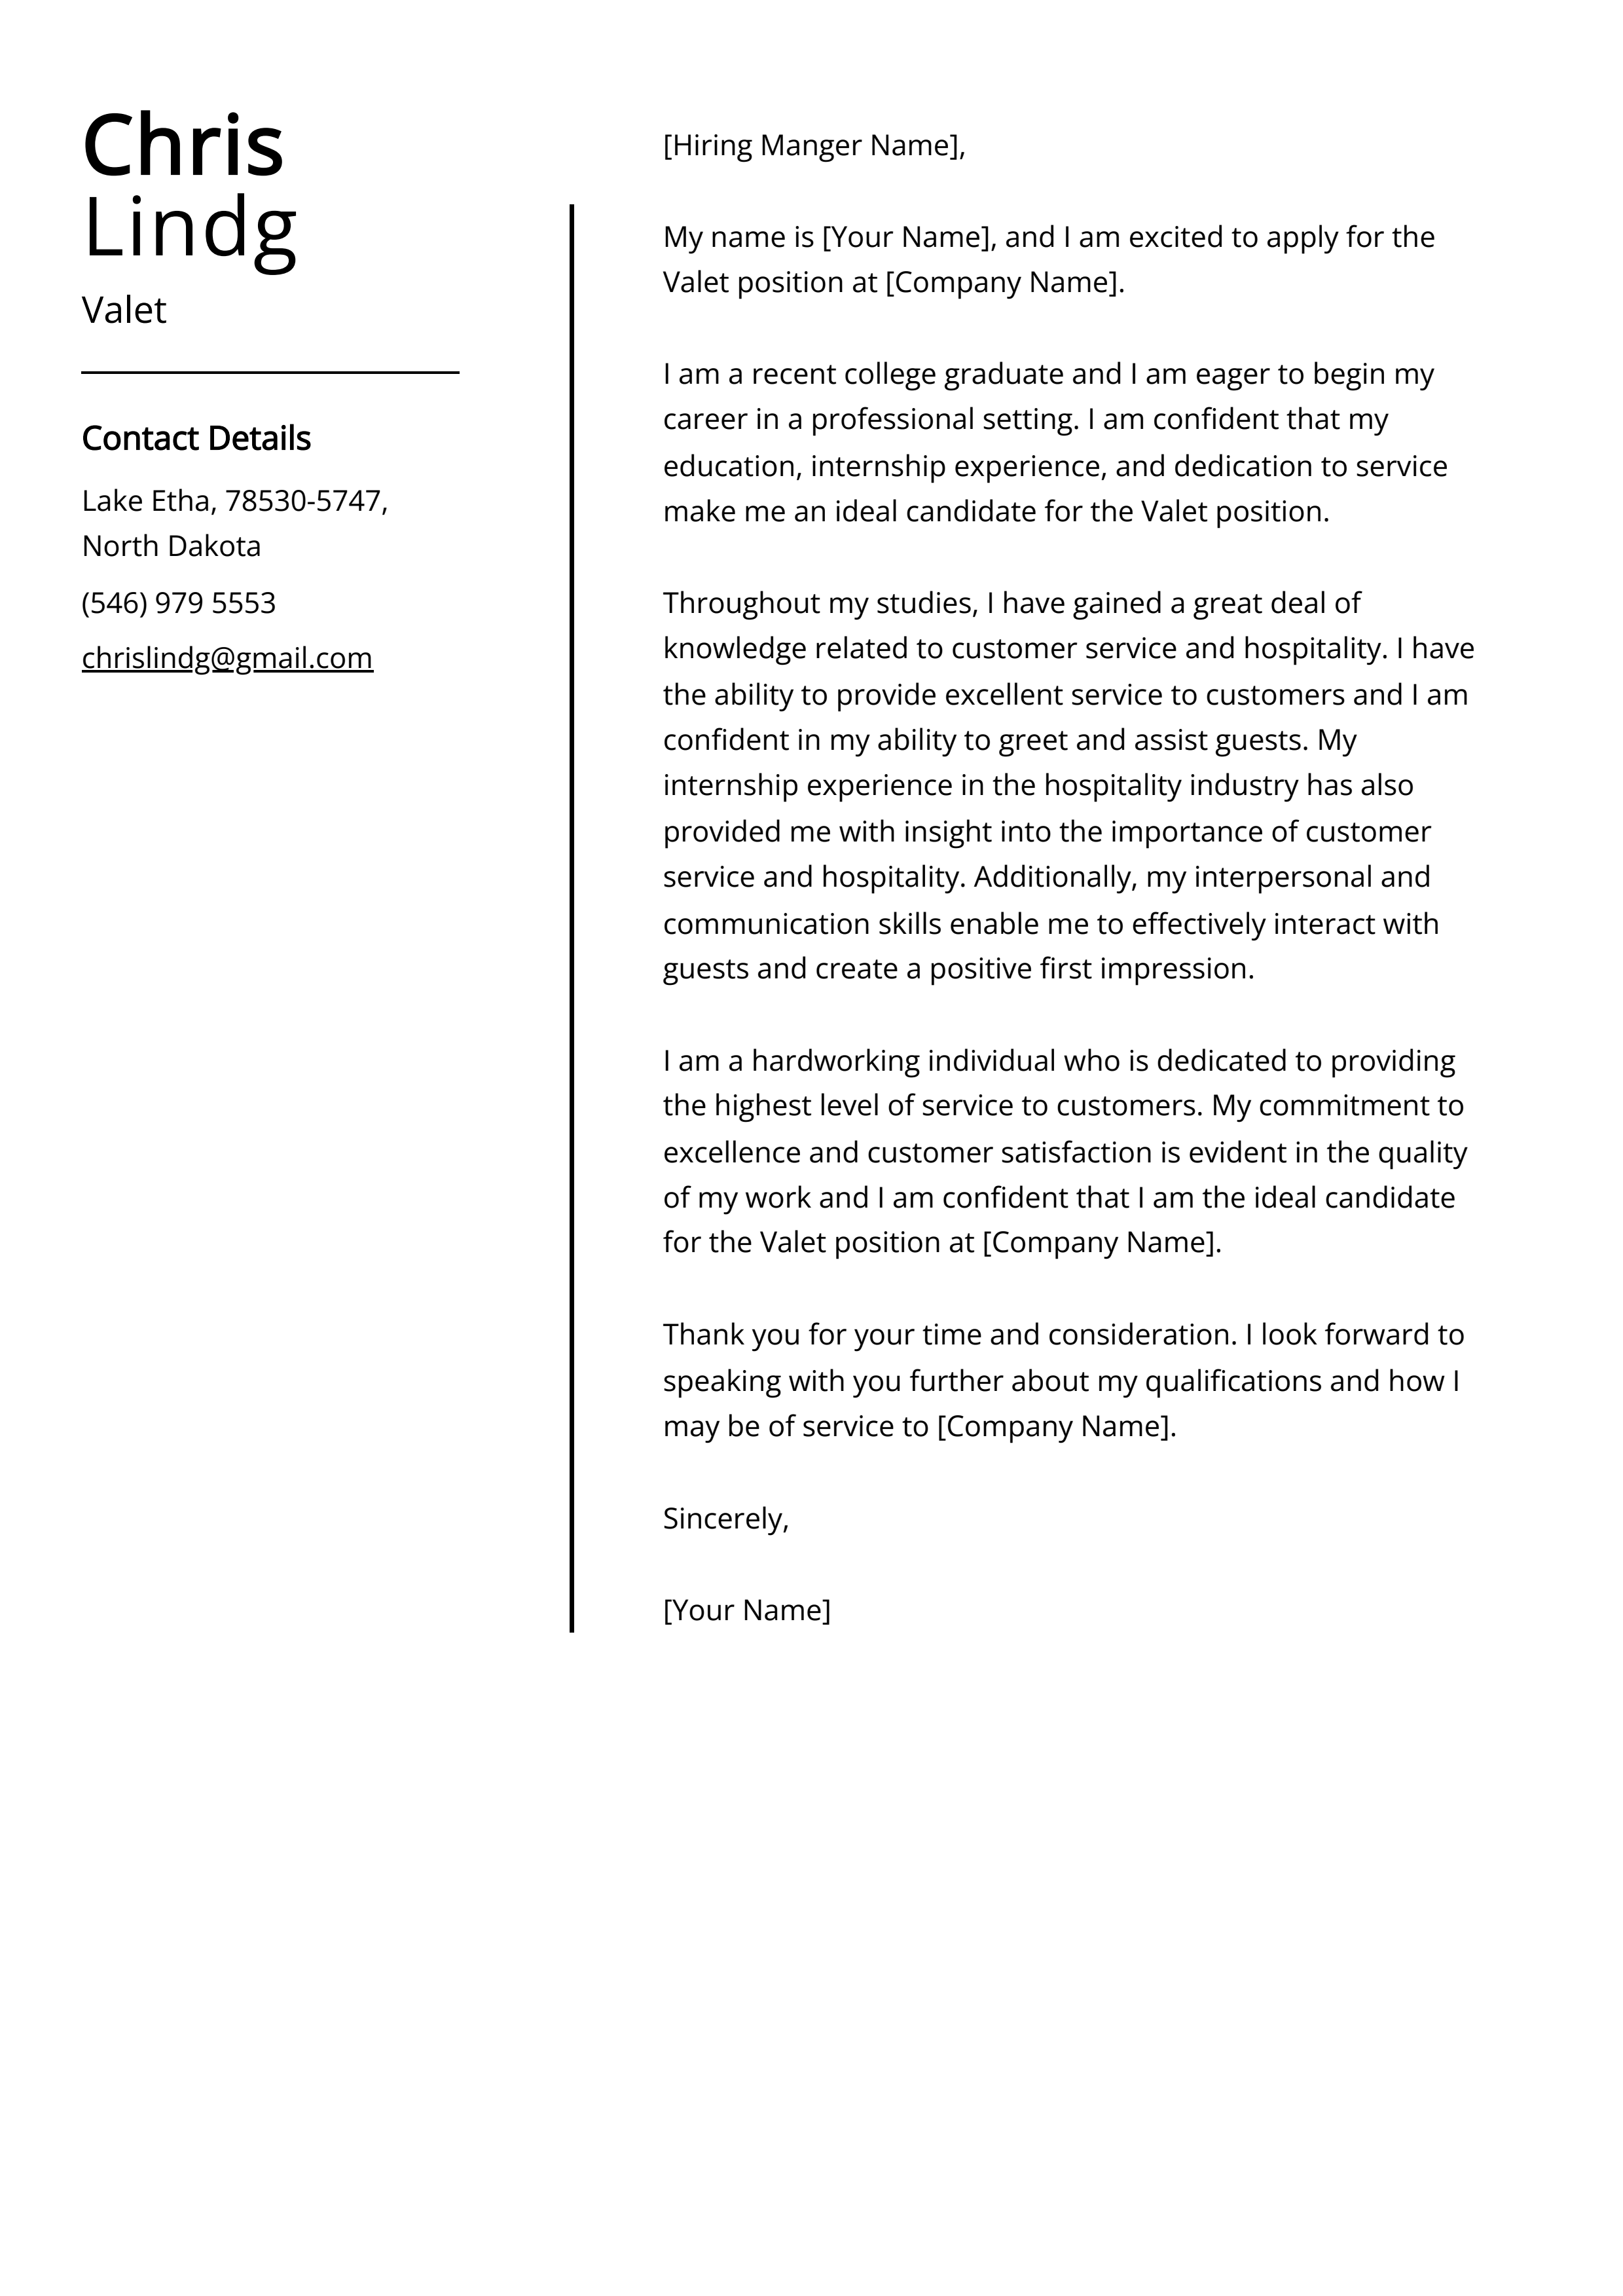 Valet Cover Letter Example